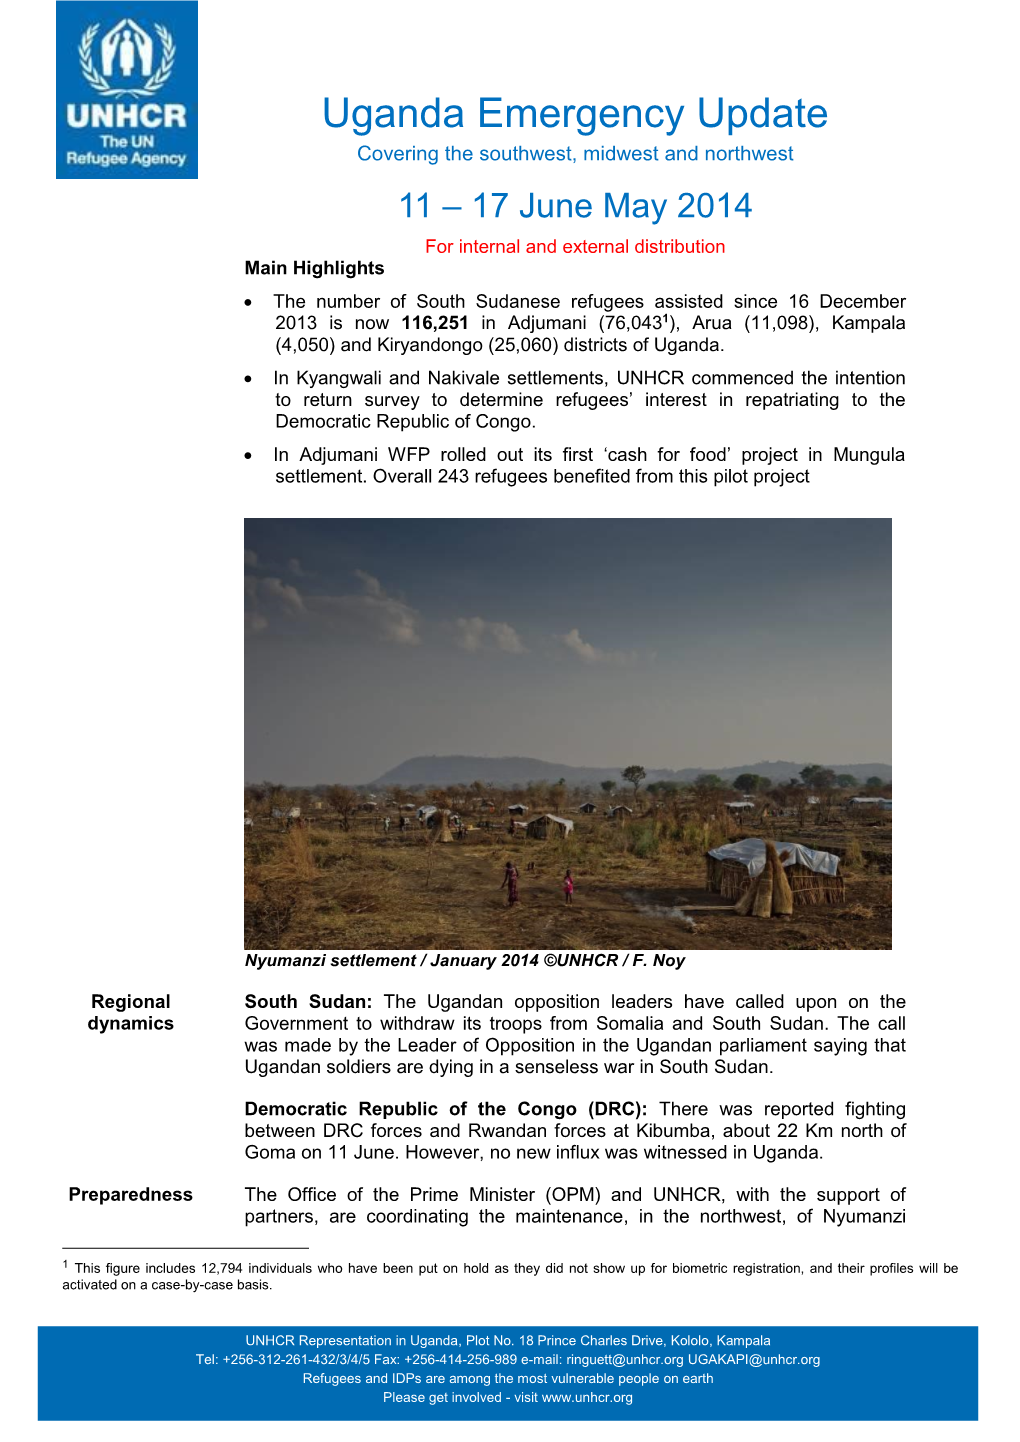 Kiryandongo Refugee Settlement Has Received and Assisted a Total of 25,060 South Sudanese Refugees Since 16 December